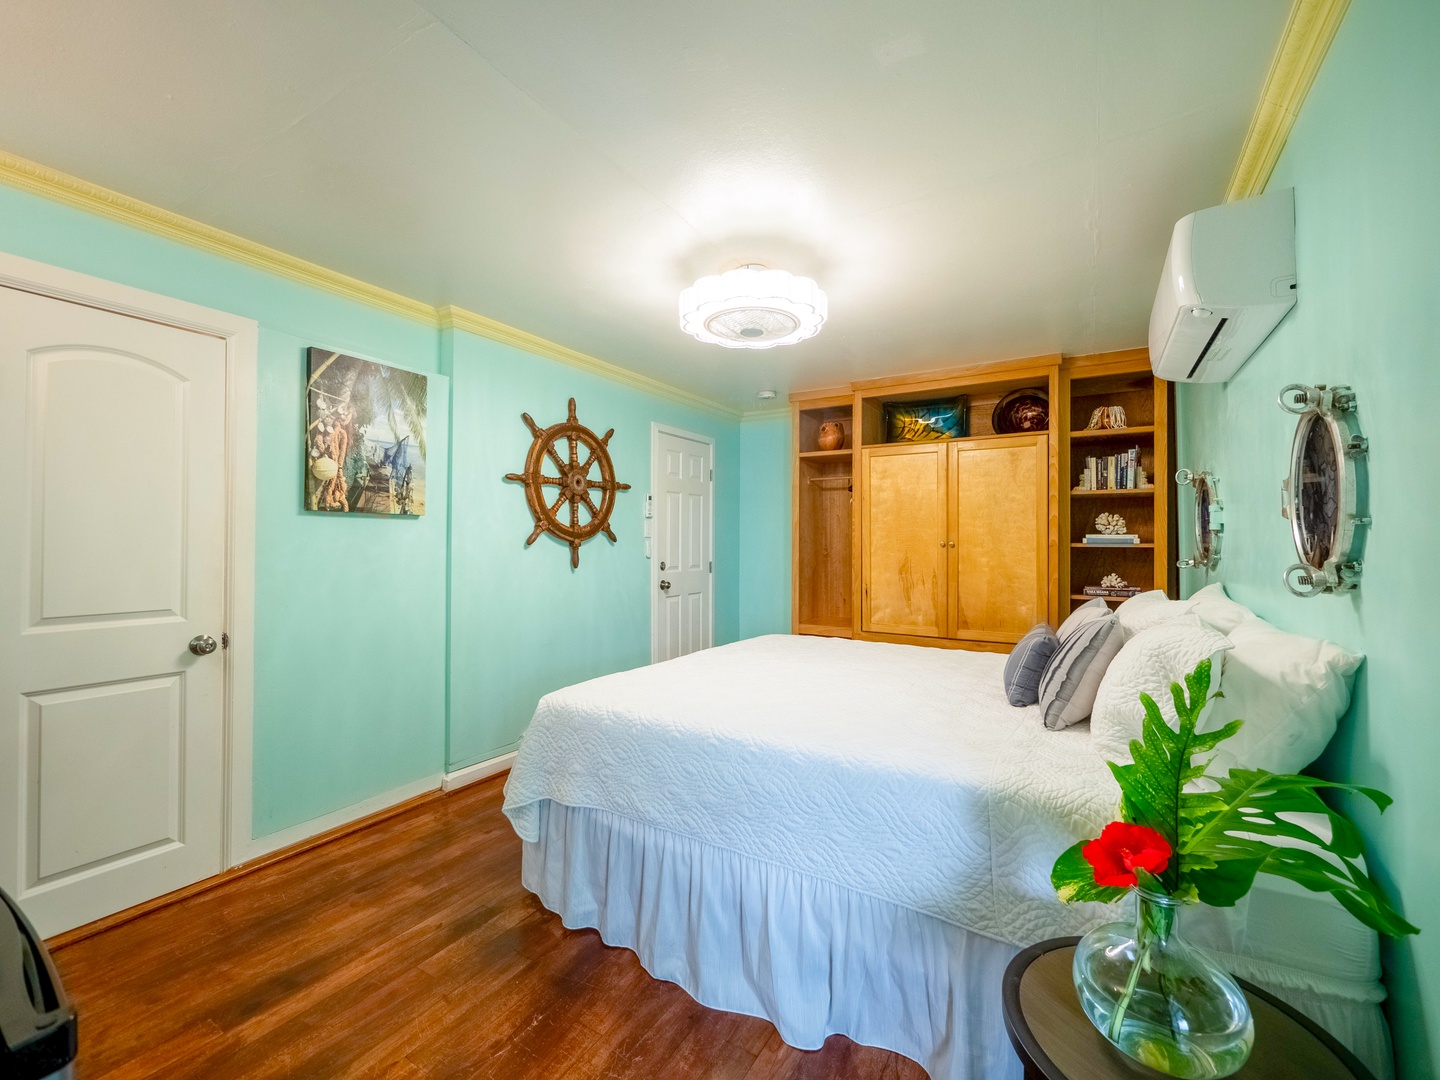 Hauula Vacation Rentals, Paradise Reef Retreat - Third bedroom with king-sized bed and flat screen TV enclosed cabinet